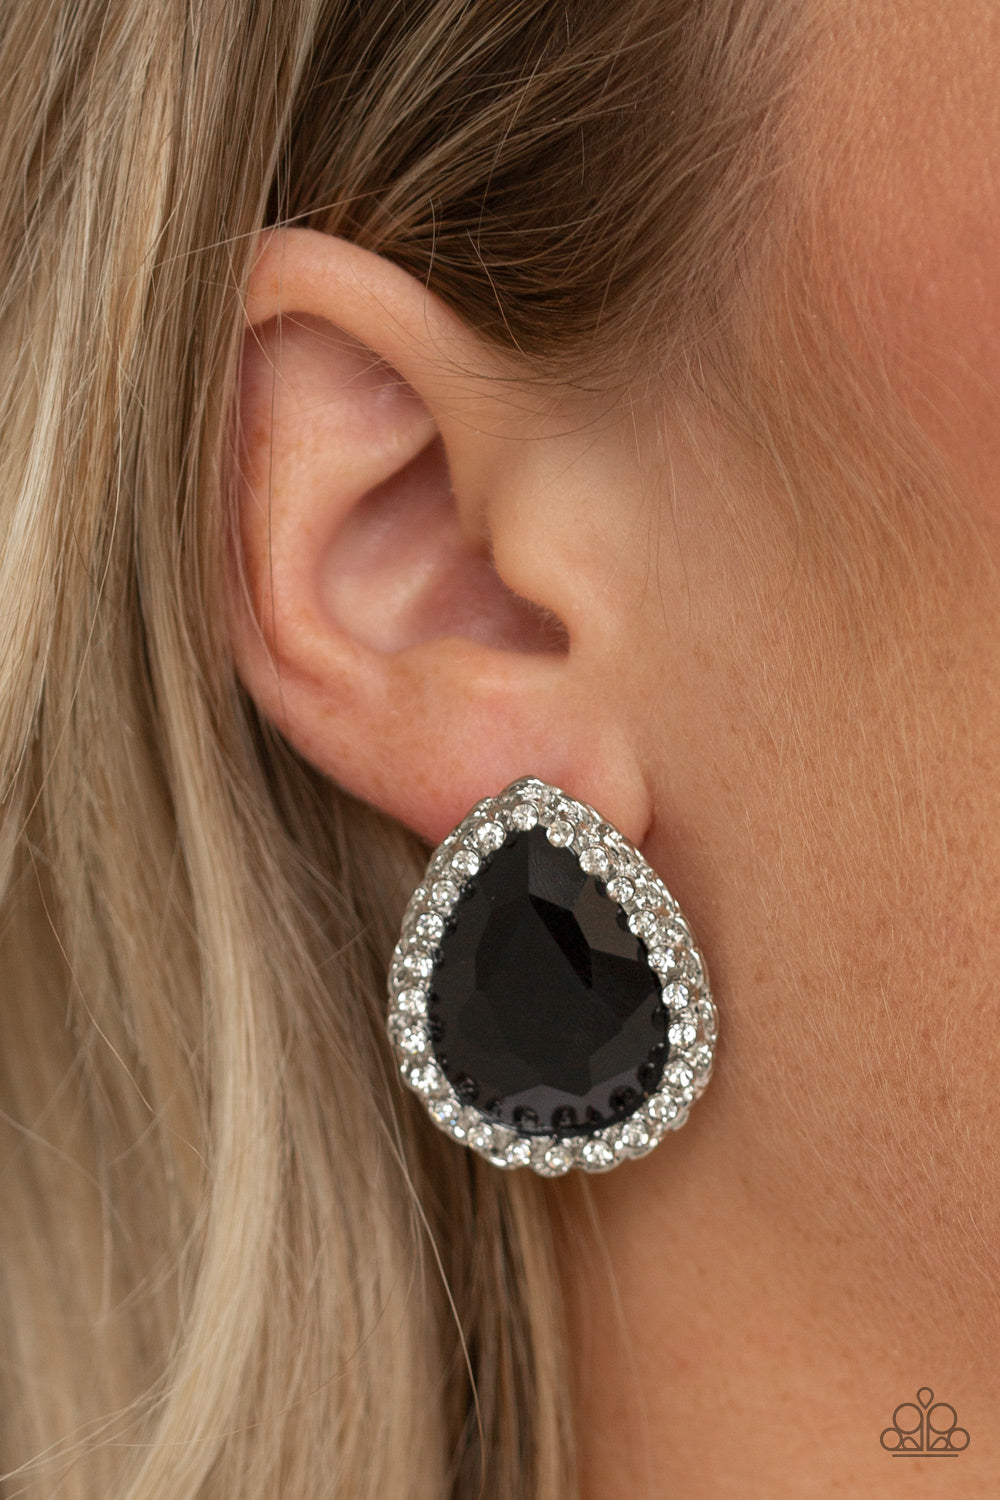 Dare To Shine - Black Item #E284 Encrusted in a ring of glittery white rhinestones, an overly dramatic black teardrop gem is pressed into a textured silver frame for a glamorous look. Earring attaches to a standard post fitting. All Paparazzi Accessories are lead free and nickel free!  Sold as one pair of post earrings.